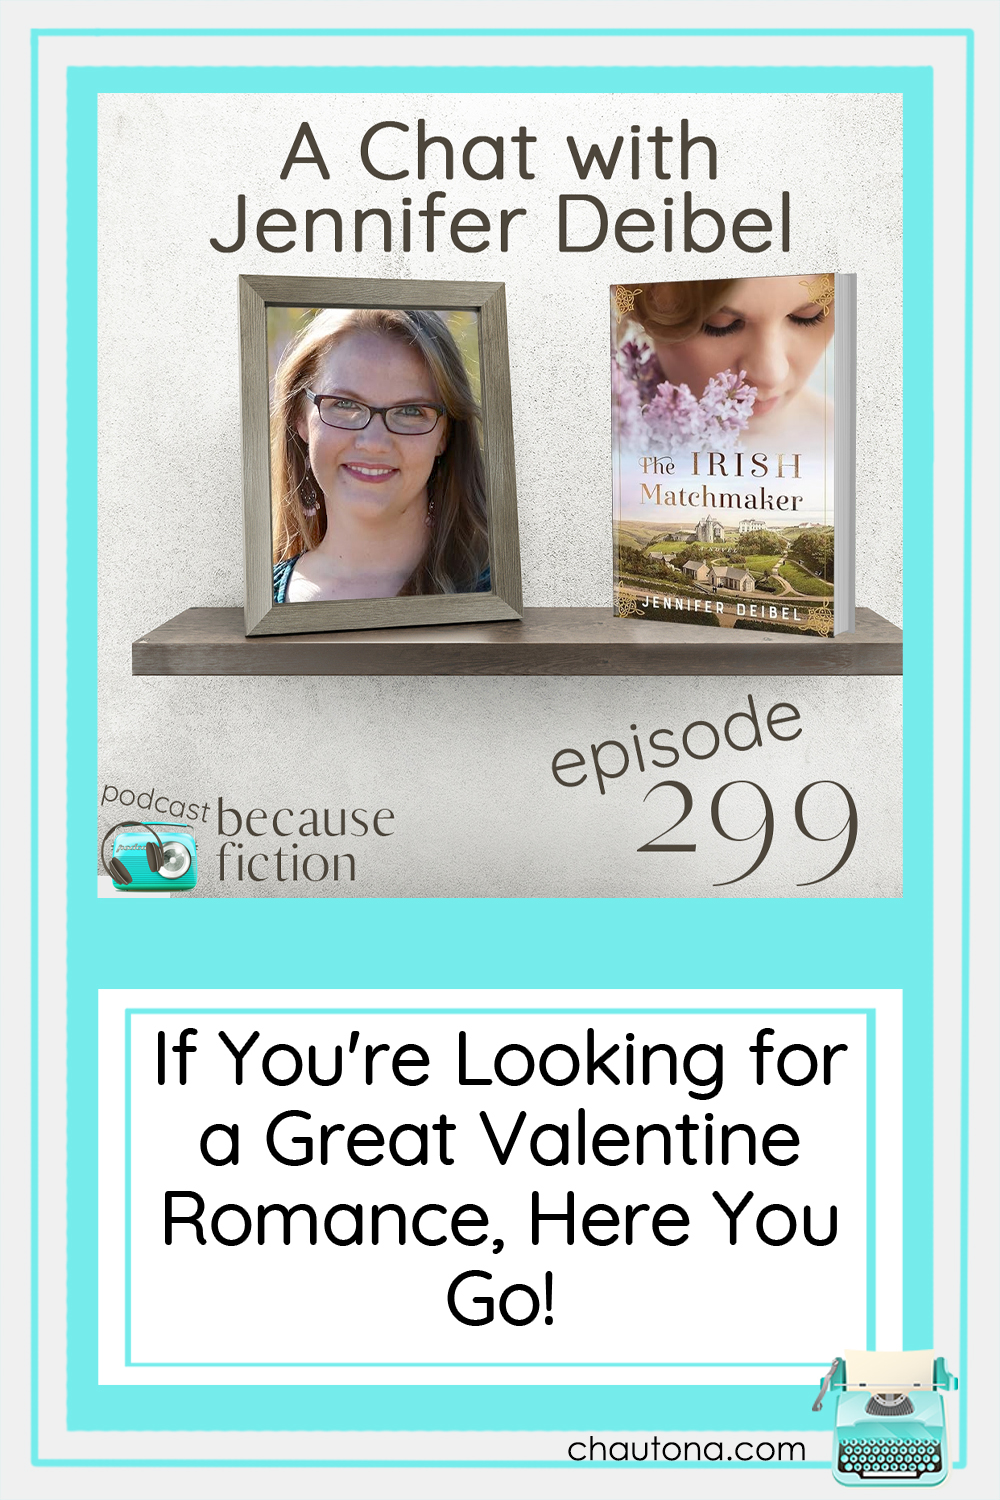 The Irish Matchmaker is a perfect Valentine read. Listen in to learn about the real matchmaking festival and more! via @chautonahavig